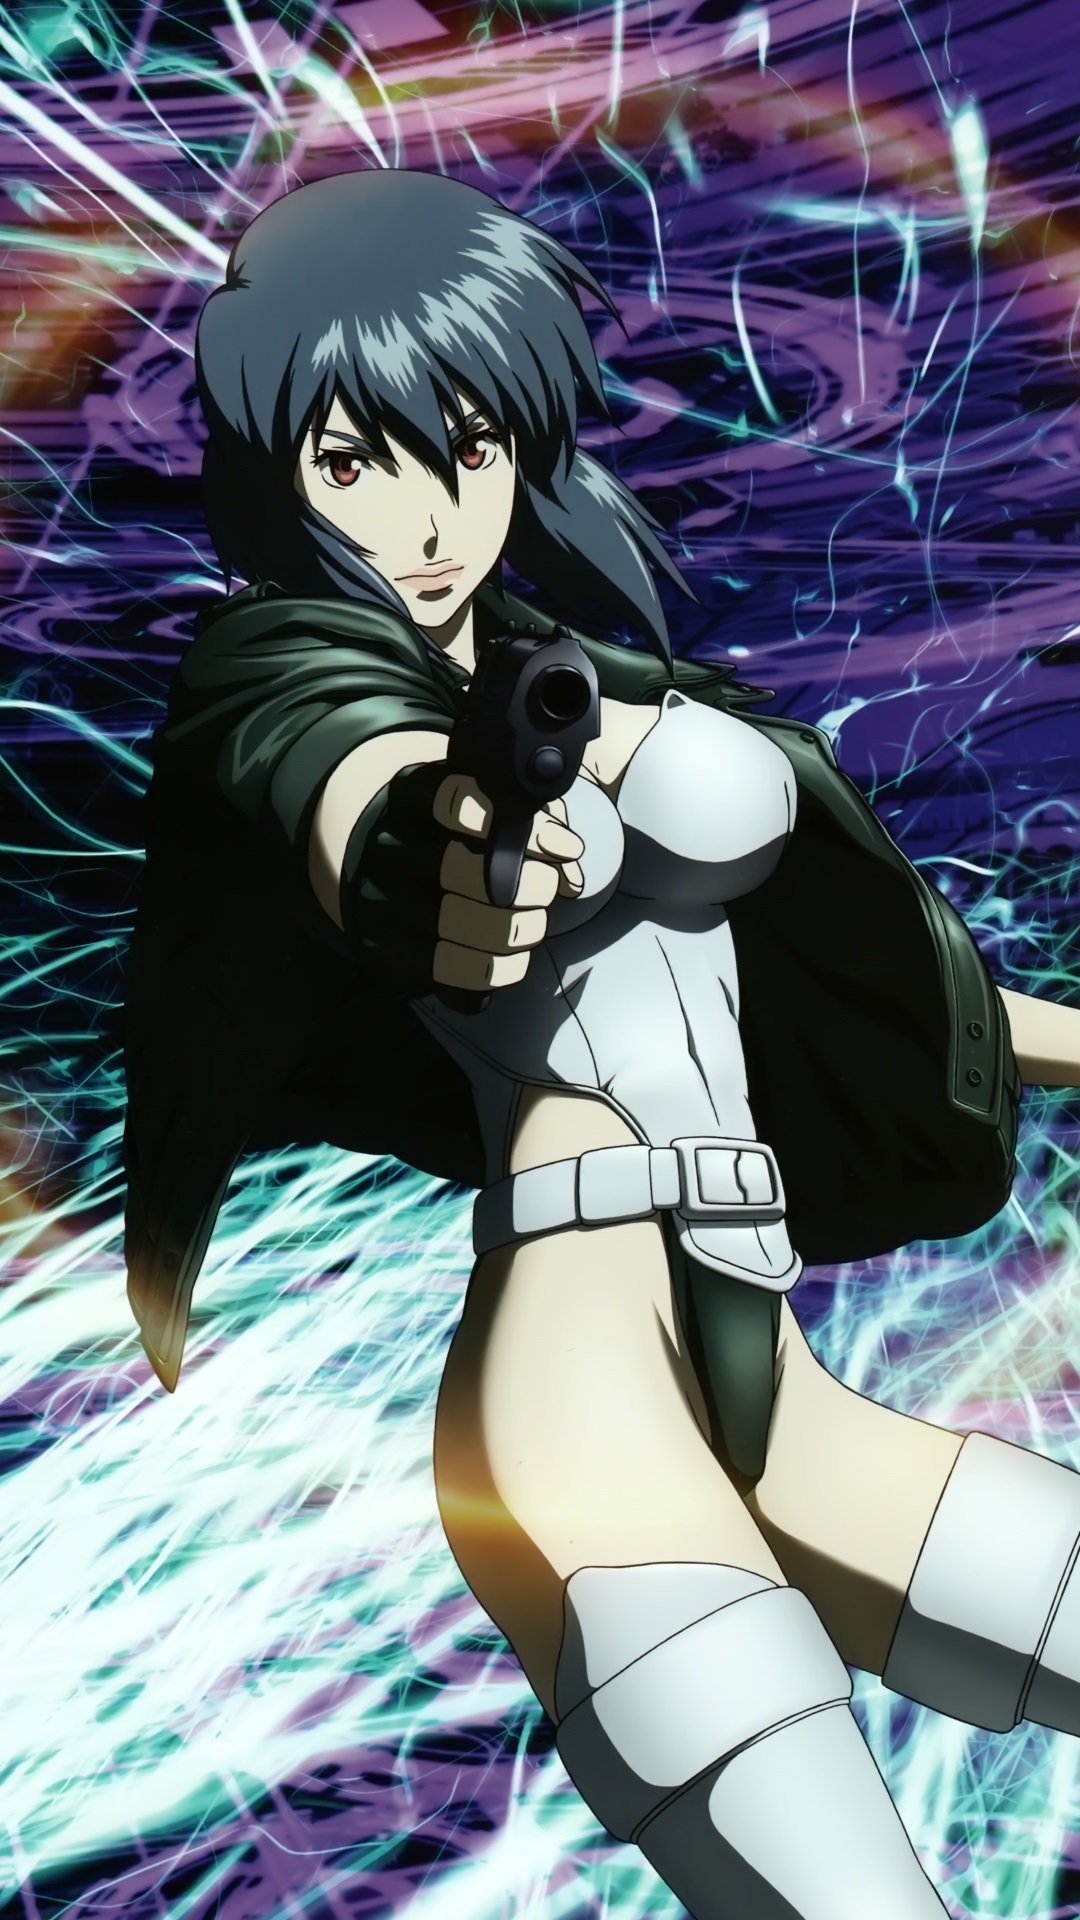 Ghost In The Shell Iphone Wallpaper - Motoko Kusanagi Ghost In The Shell Phone - HD Wallpaper 